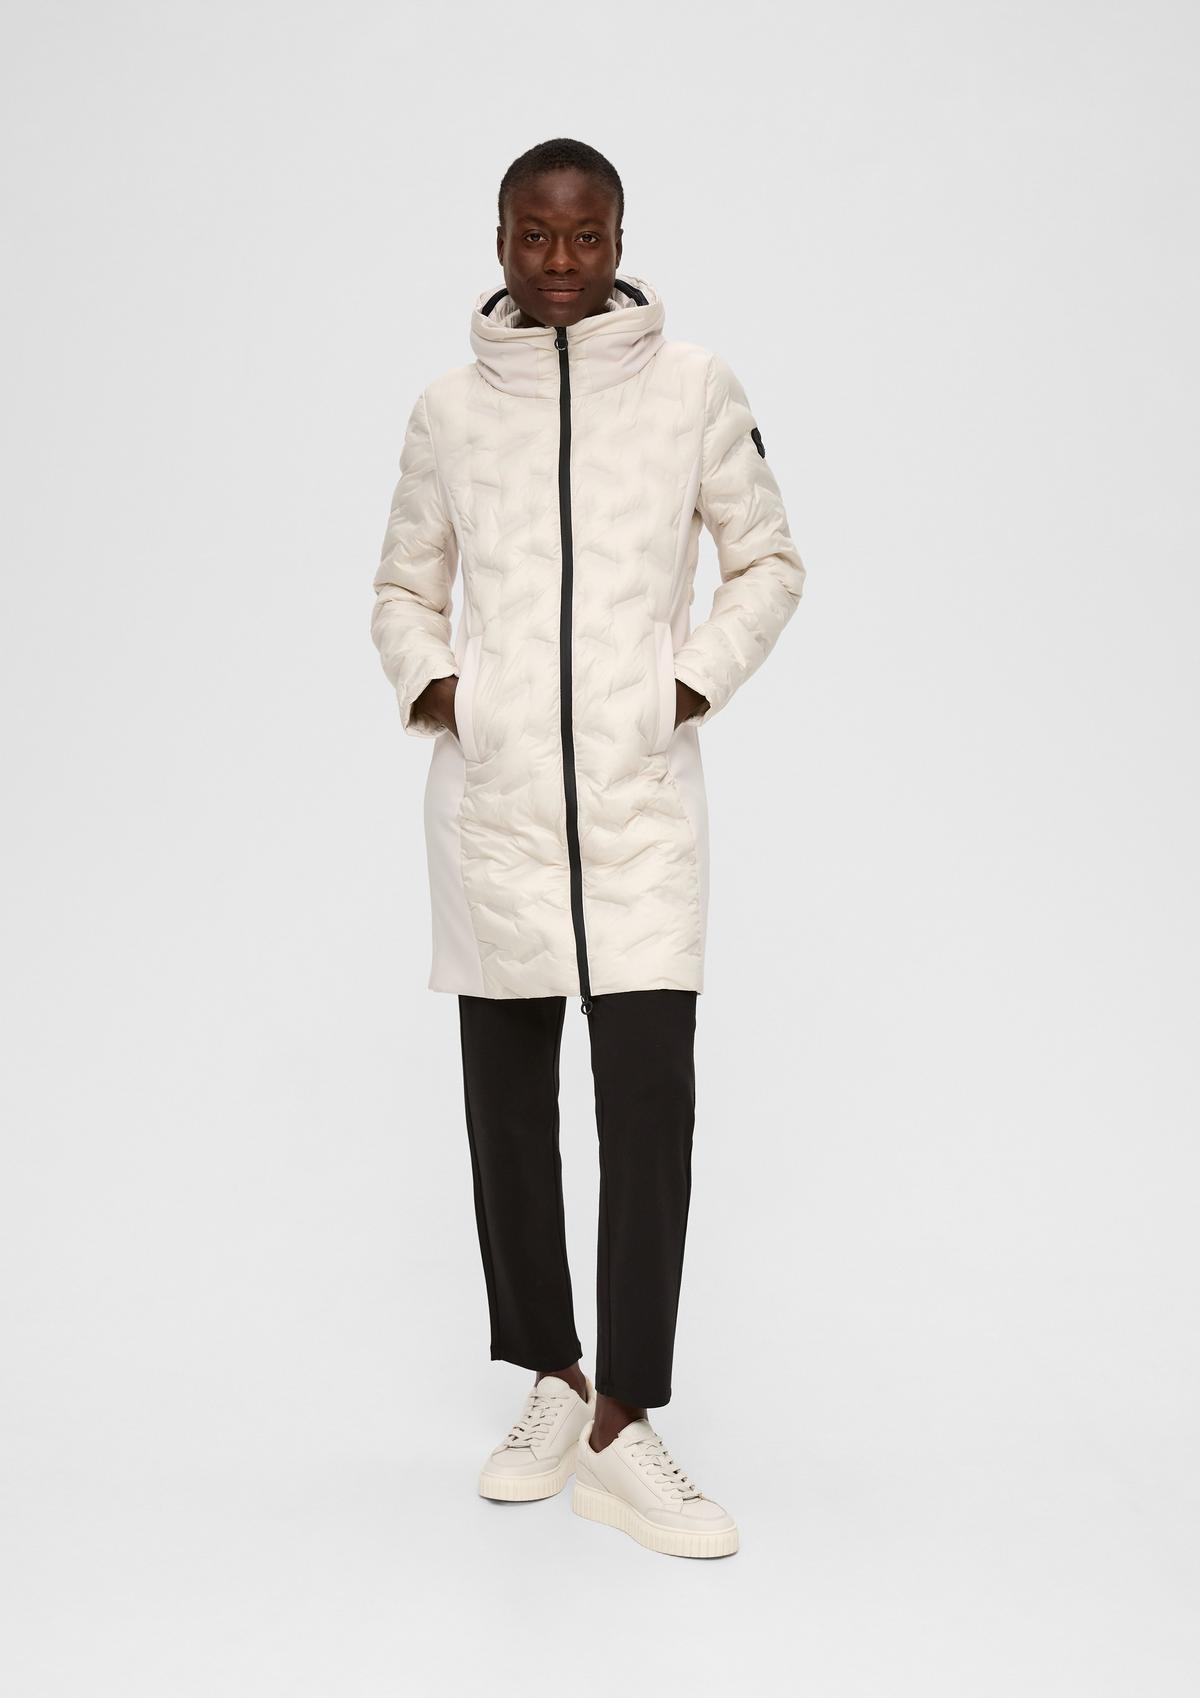 Coat with a in - collar hood the offwhite